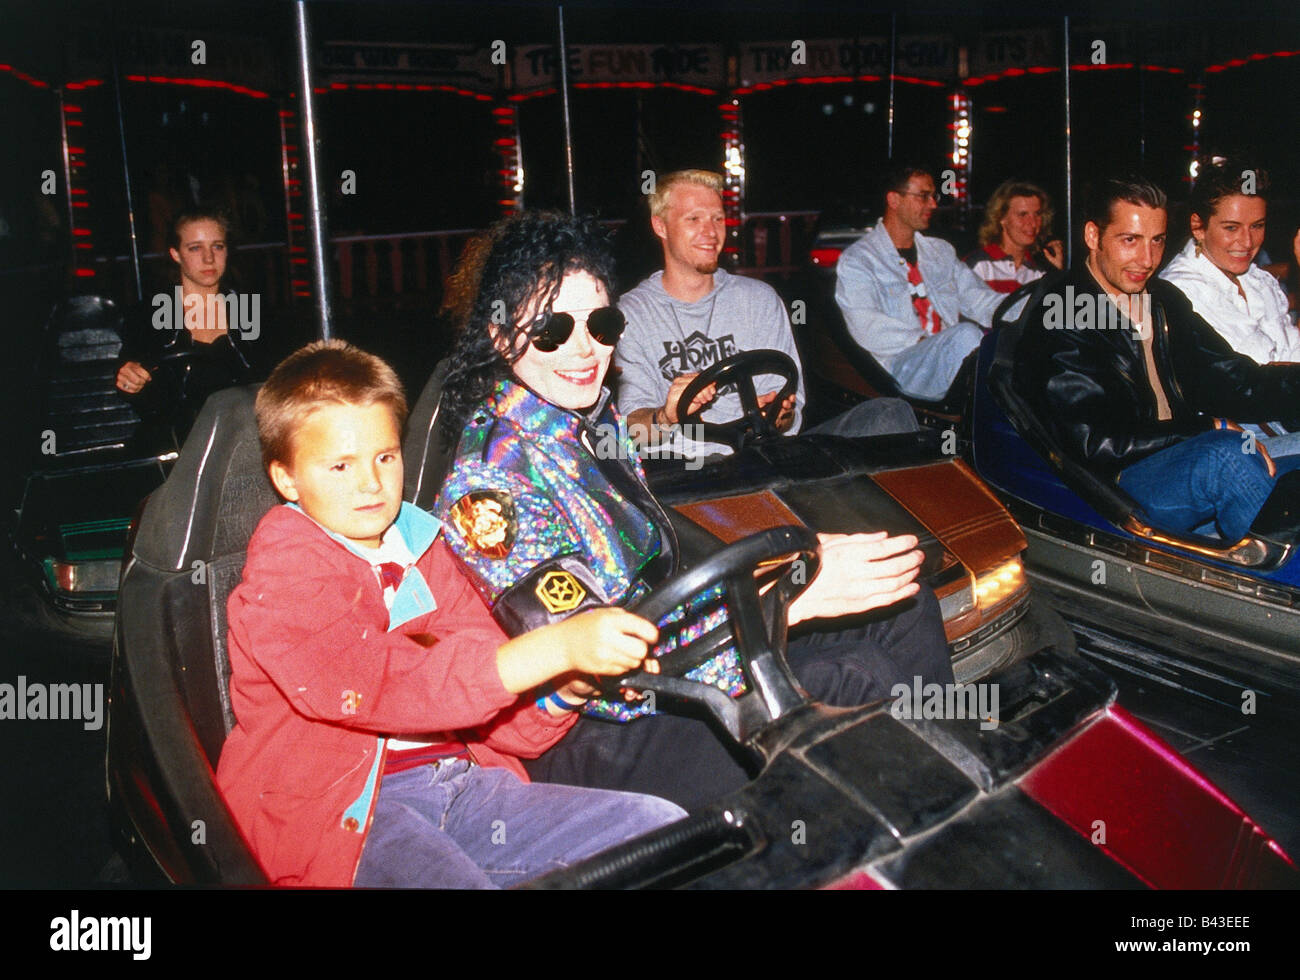 Thurn and Taxis, Prince Albert, * 24.6.1983, with Michael Jackson, 1993, Stock Photo